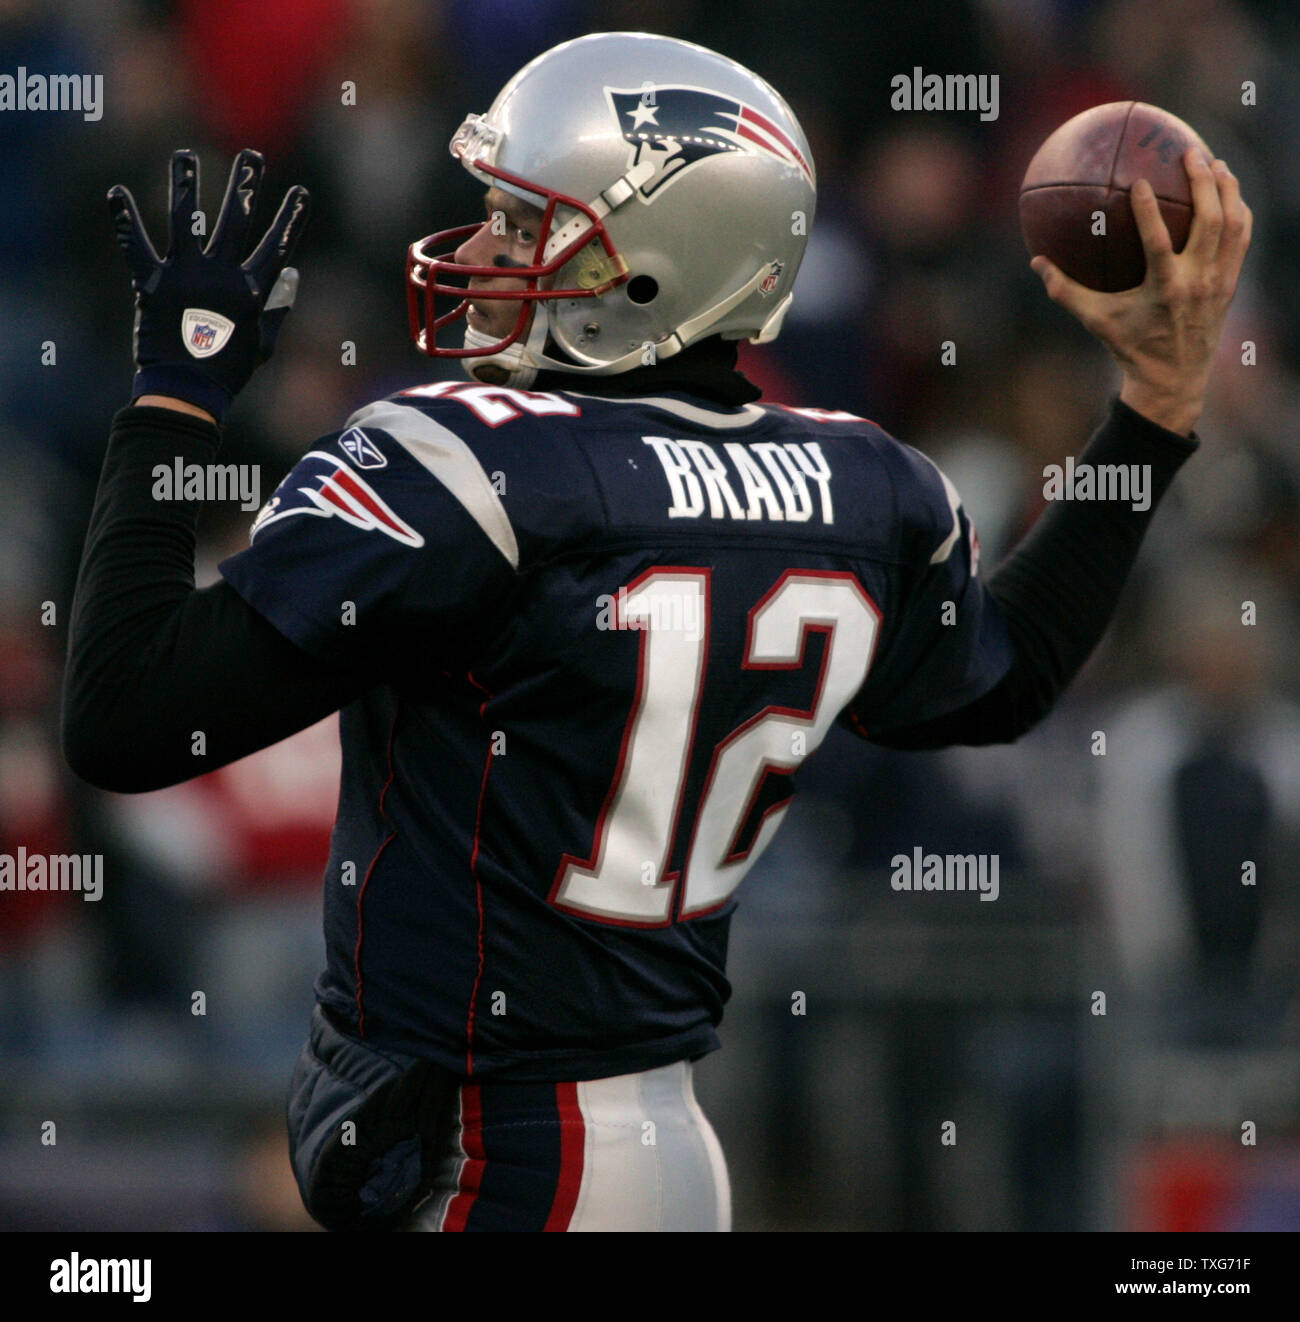 New England Patriots quarterback Tom Brady throws a pass during warm ups before the AFC division playoff game against the New York Jets at Gillette Stadium in Foxboro, Massachusetts on January 16, 2011.    UPI/Matthew Healey Stock Photo